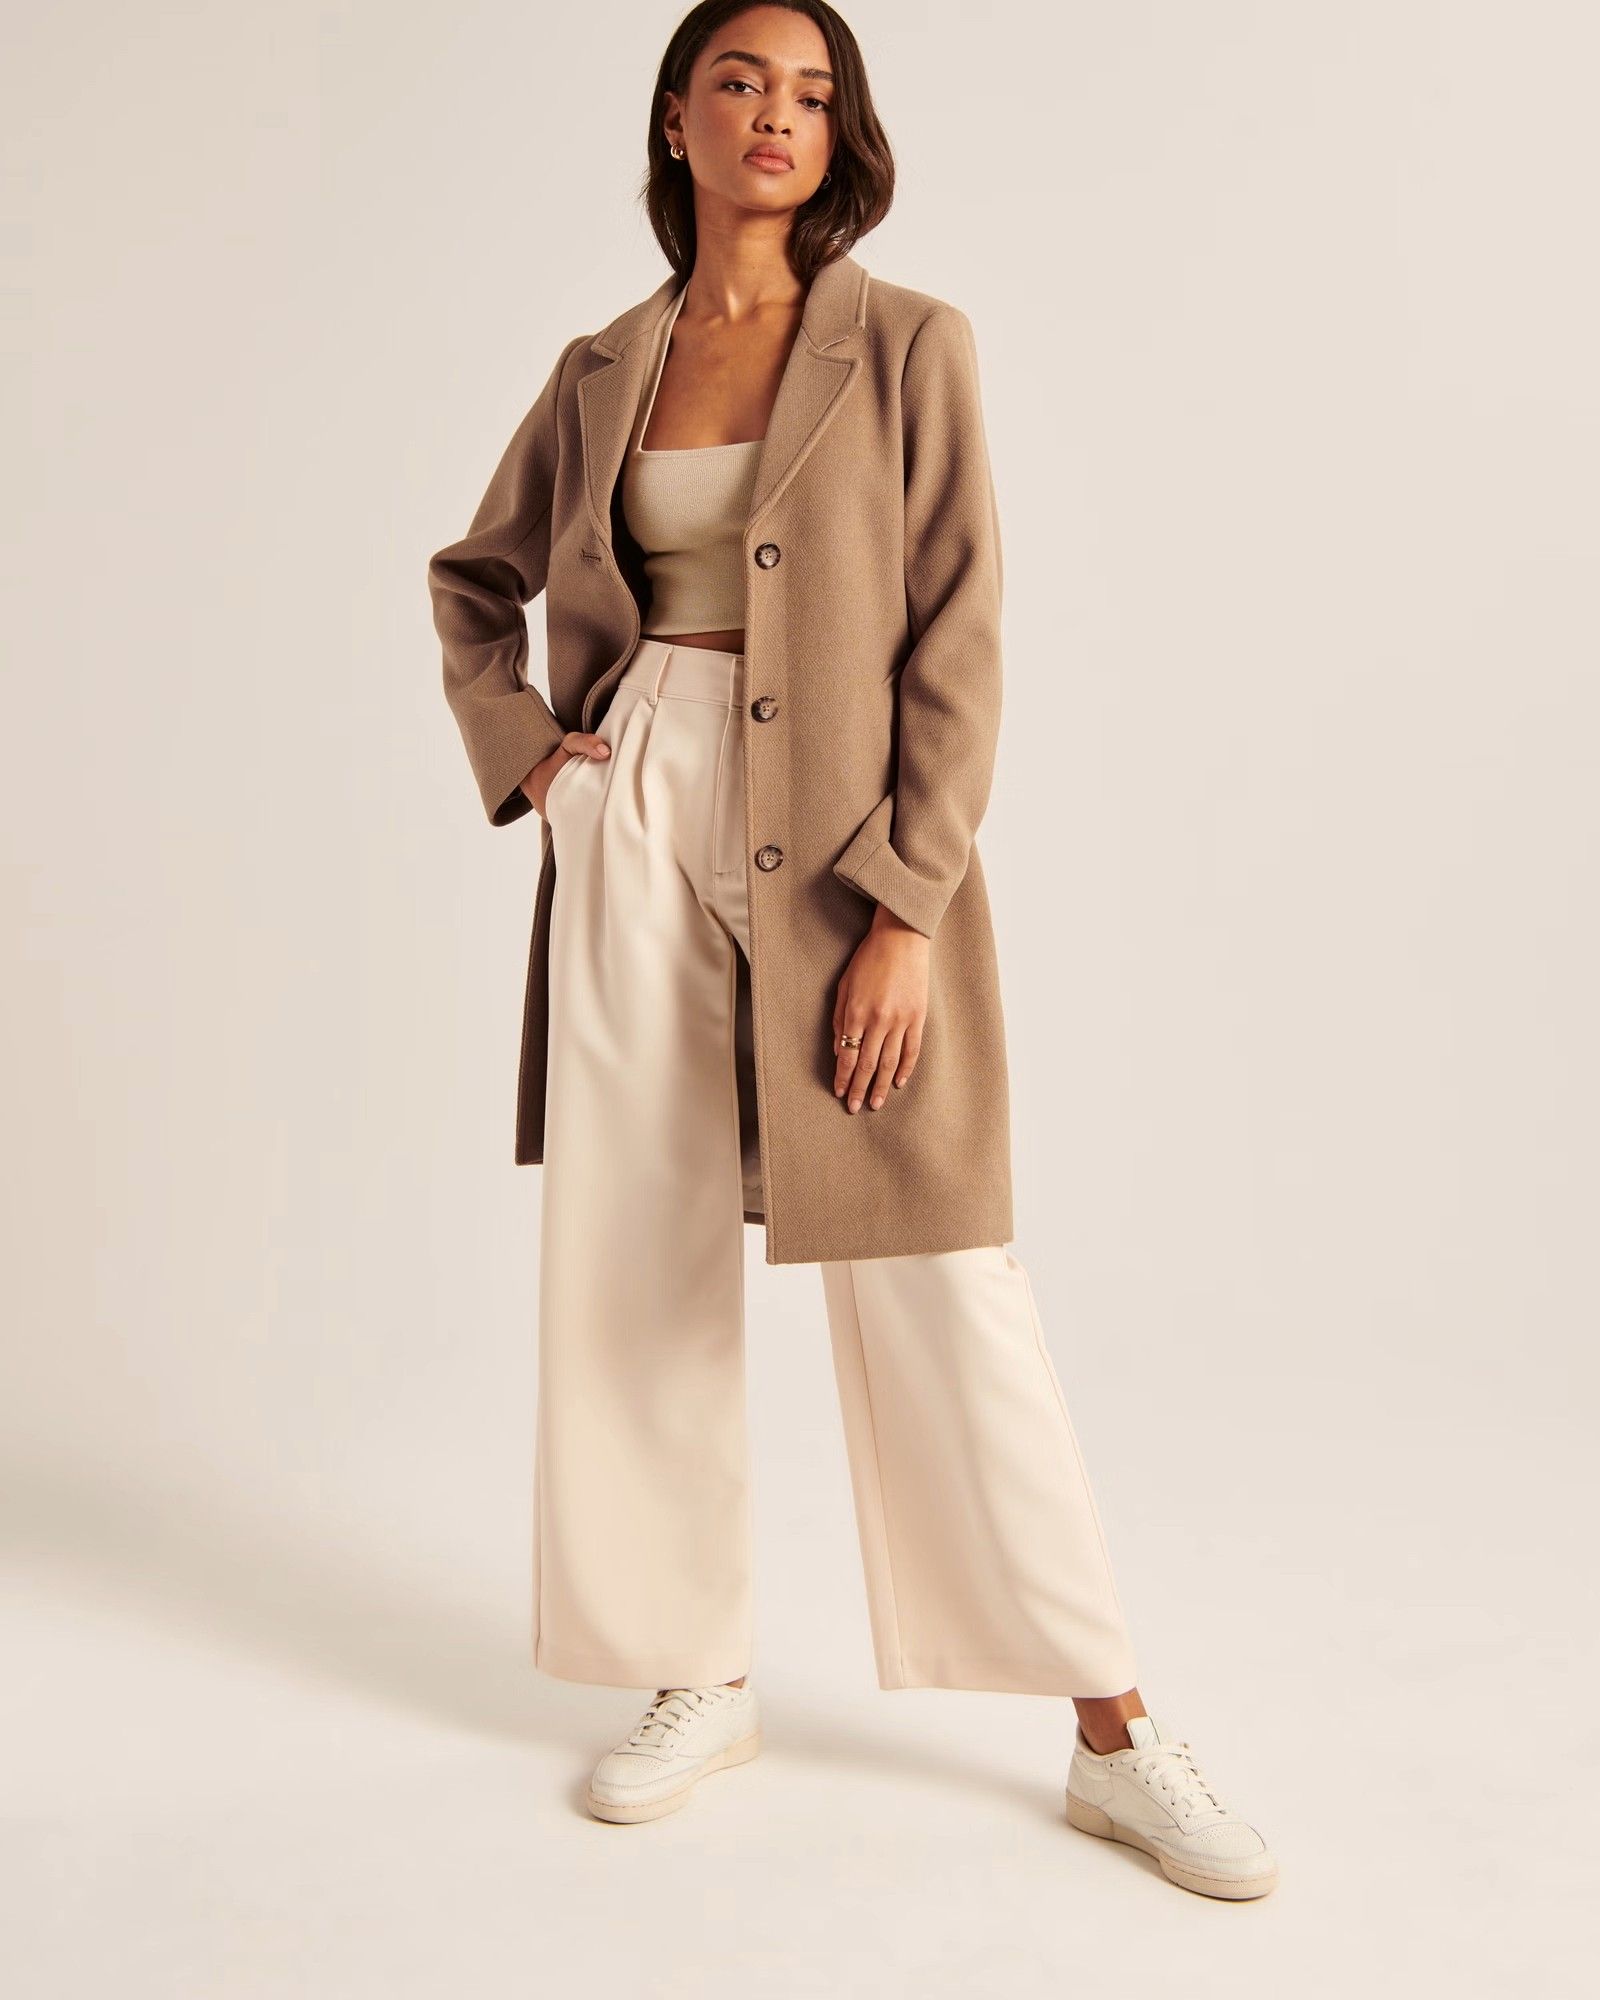 25 Beautiful Wool Coats You'll Want In Your Winter Wardrobe - Brit